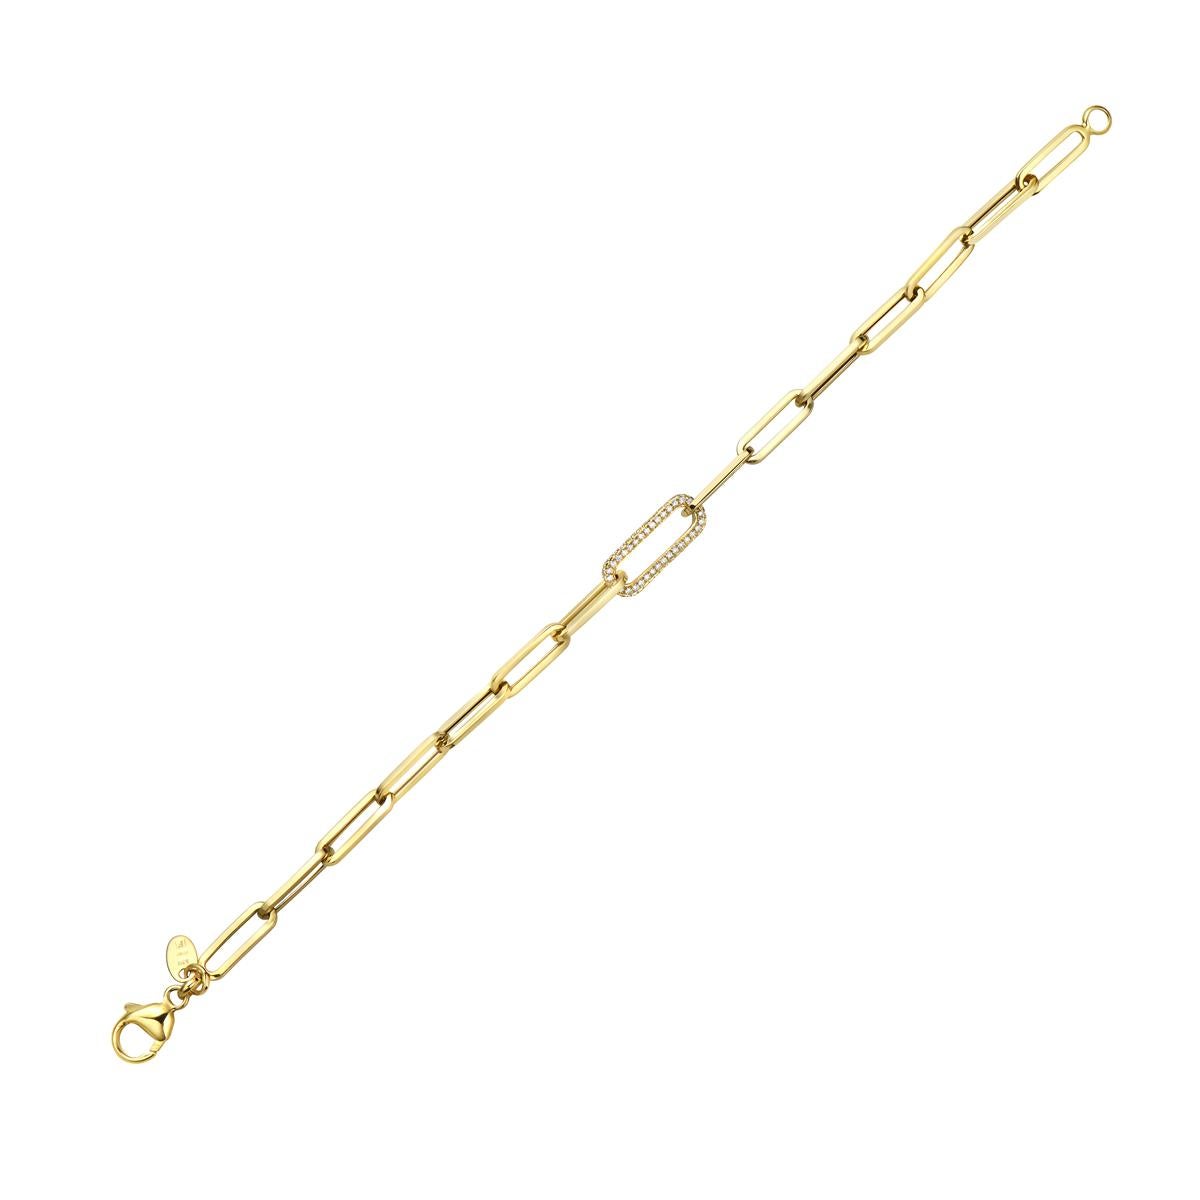 With this exquisite yellow gold paperclip diamond bracelet , style and glamour are in the spotlight. This 14 karat yellow gold bracelet is made from 4.2 grams of gold and is covered in 108 round SI1-SI2, GH color diamonds totaling 0.36ct.